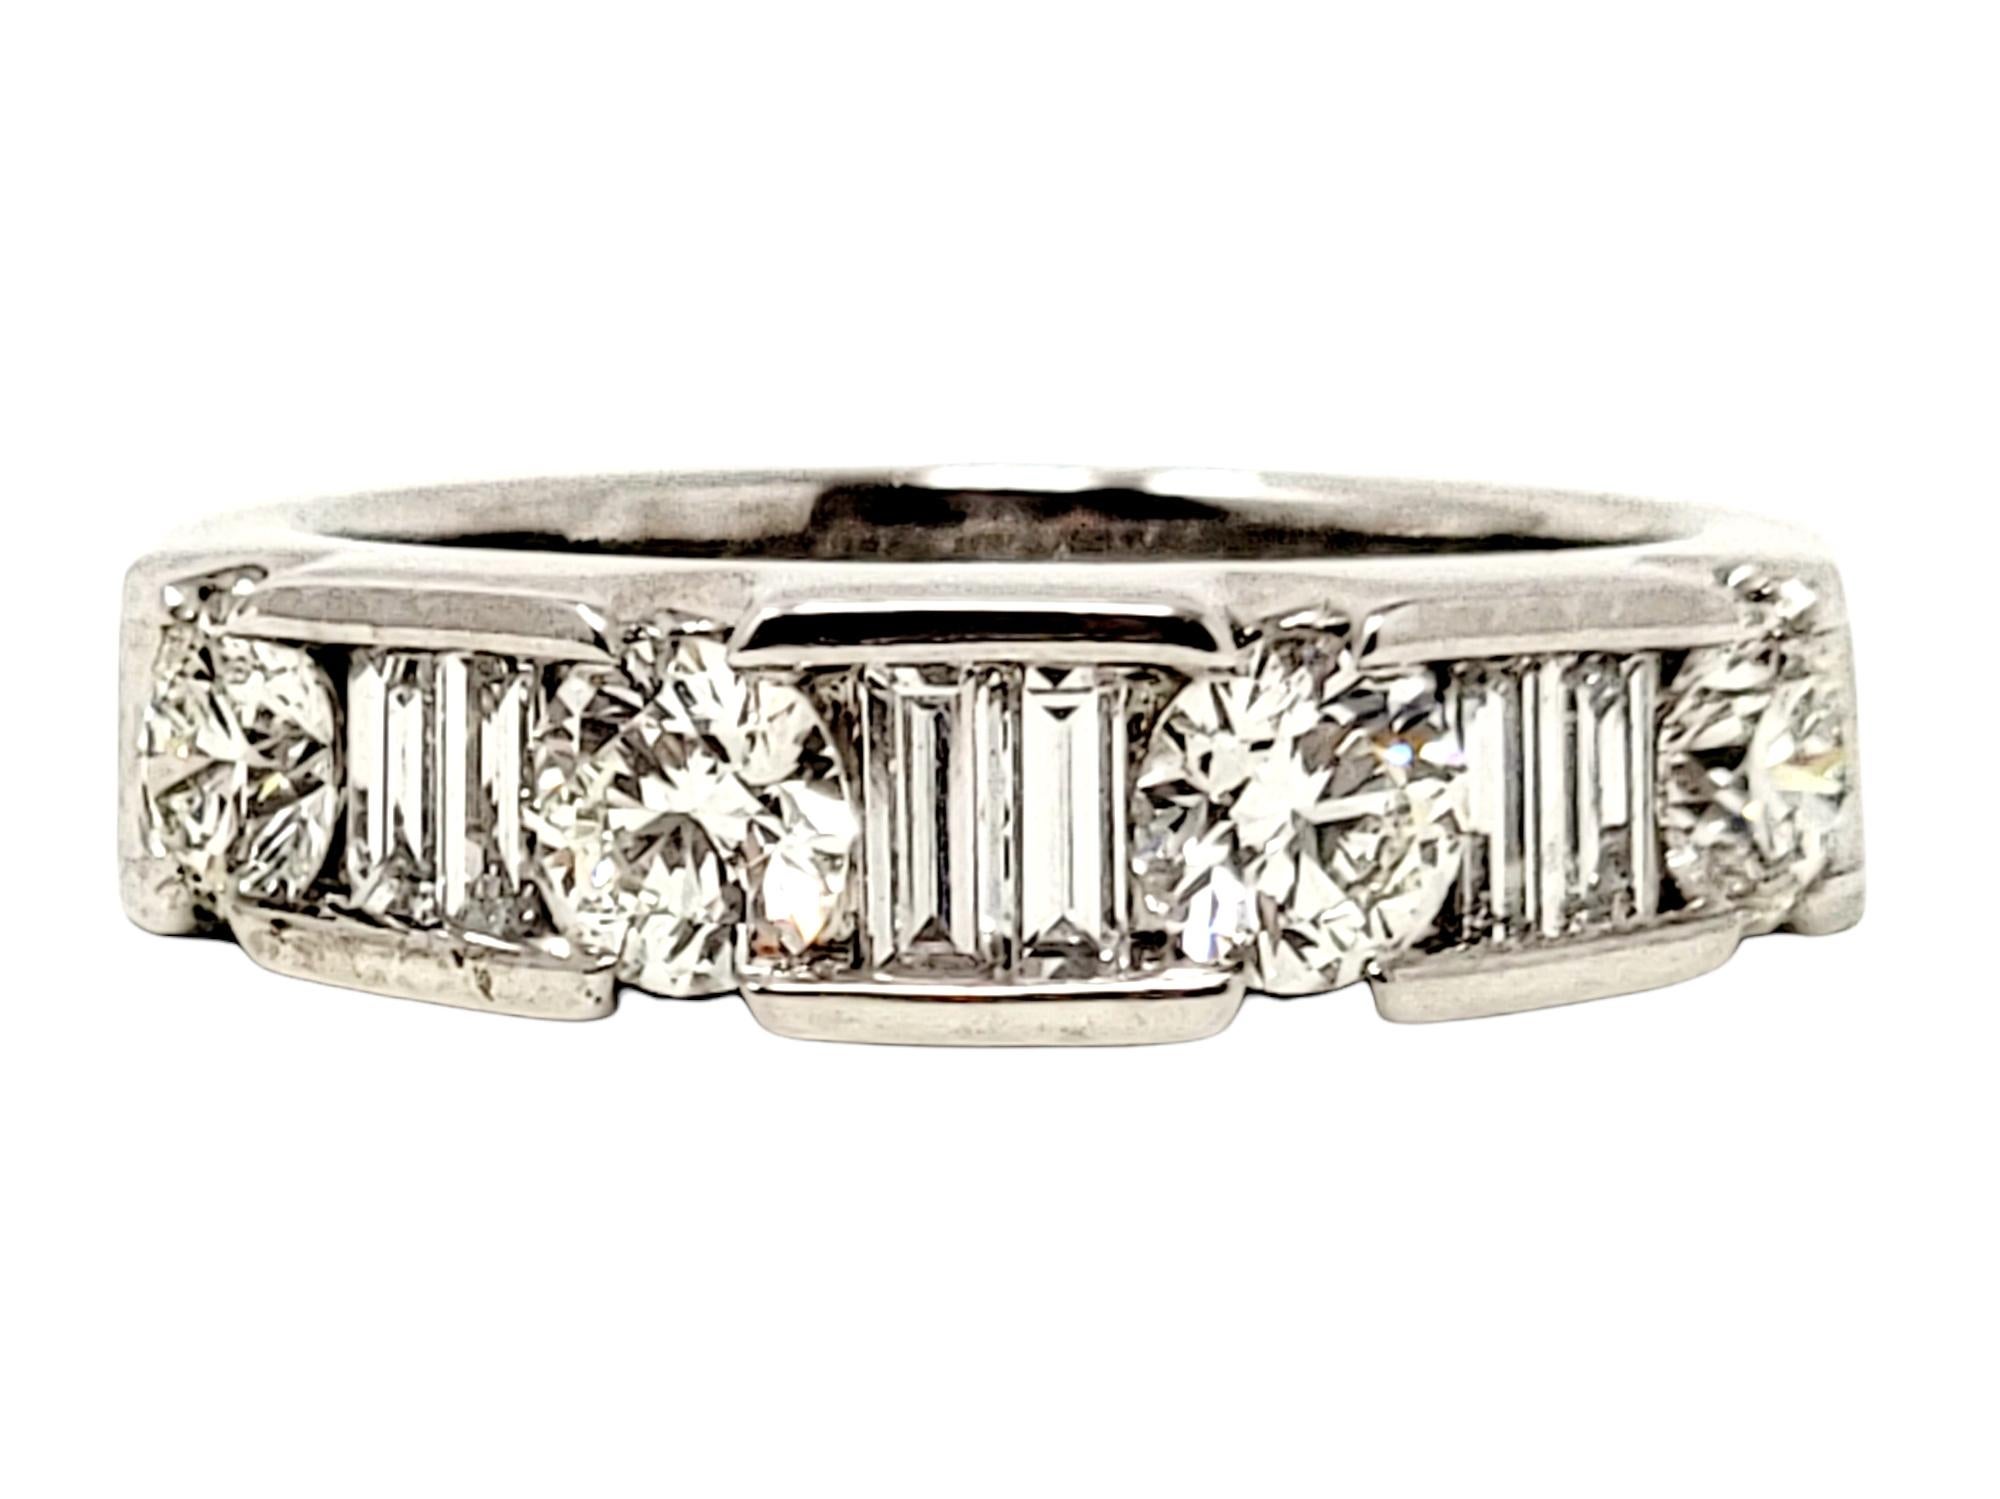 Ring size: 7

Stunning round and baguette diamond band ring. This sparkling beauty features icy white diamonds semi-channel set in a single row, with the stones set very close together for a continuous path of diamonds. Pair this versatile piece